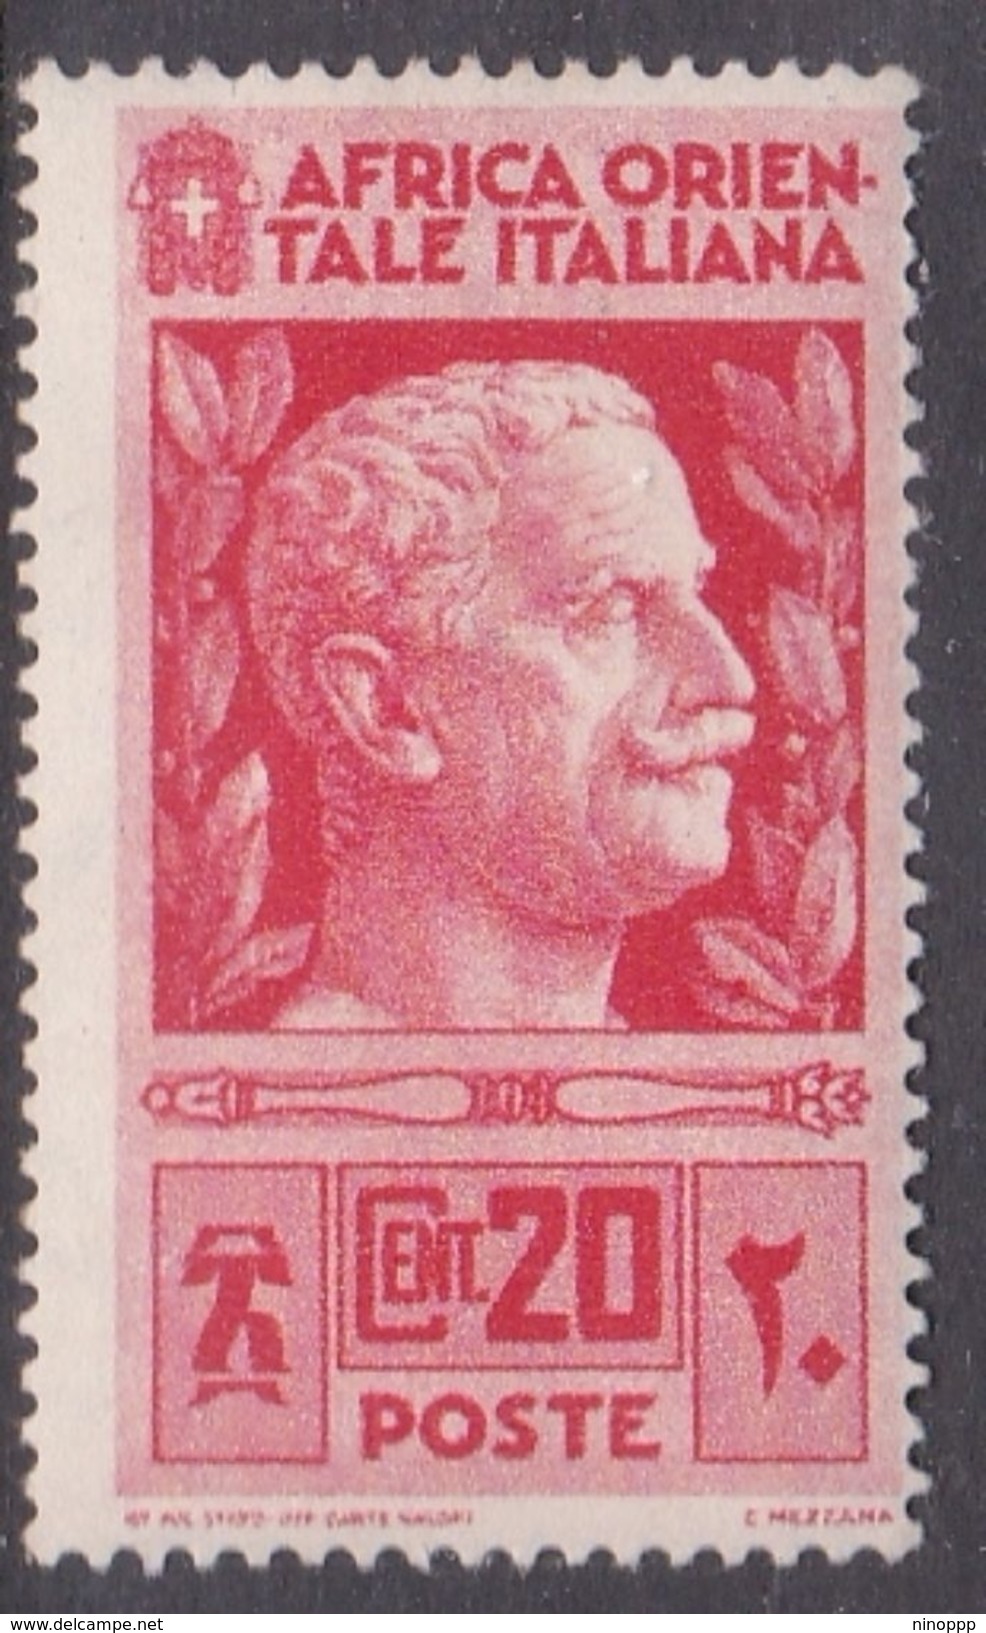 Italy-Colonies And Territories-Italian Eastern Africa S6 1938 20c Red MH - General Issues